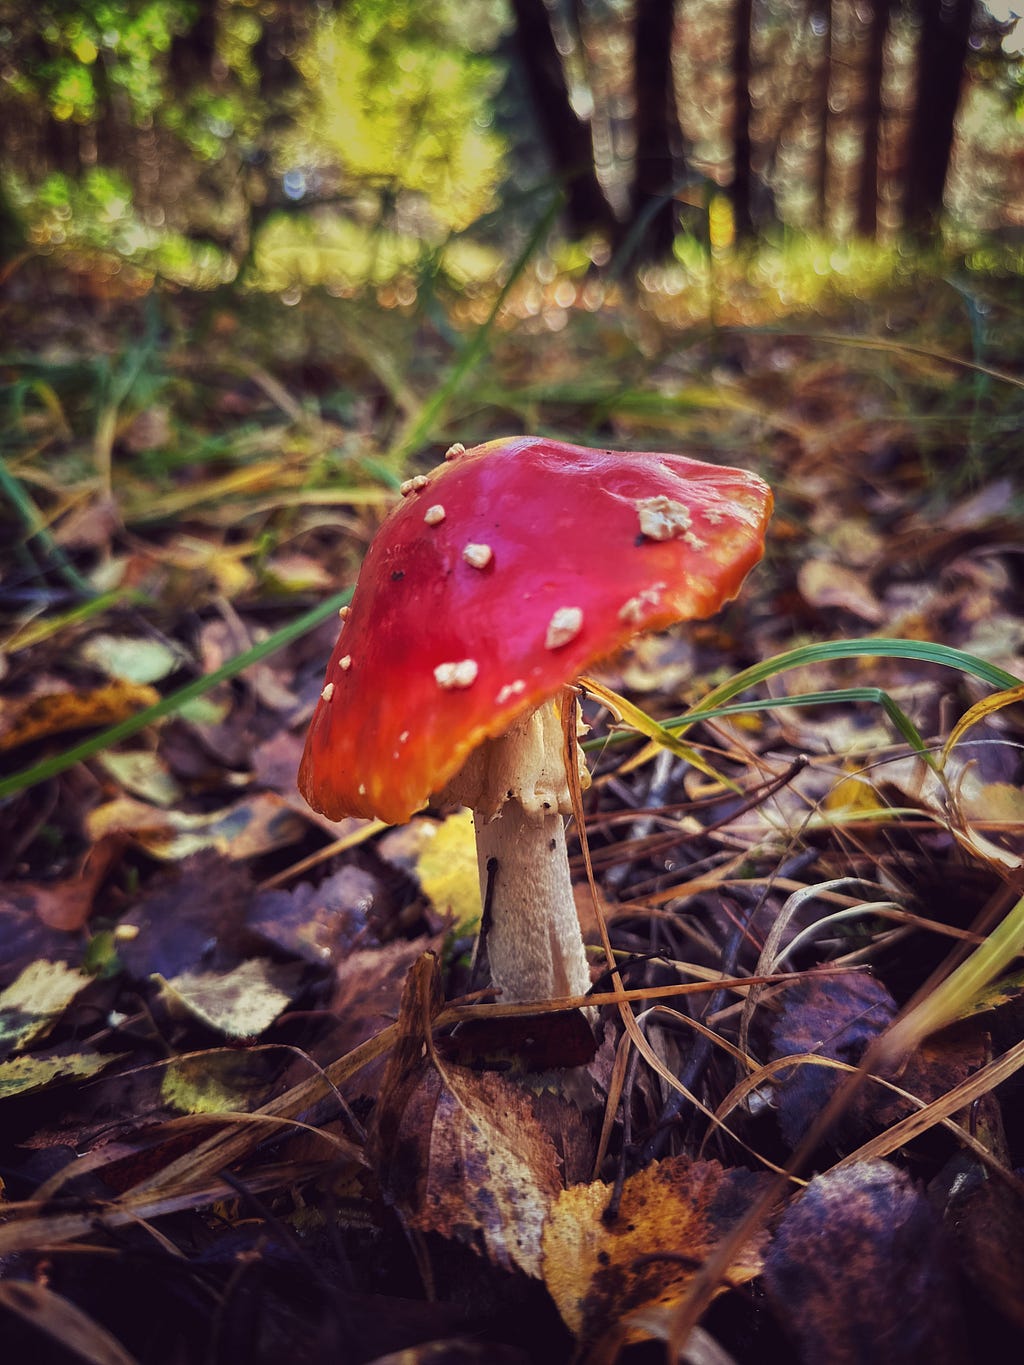 A red and white toadstool in the forest.